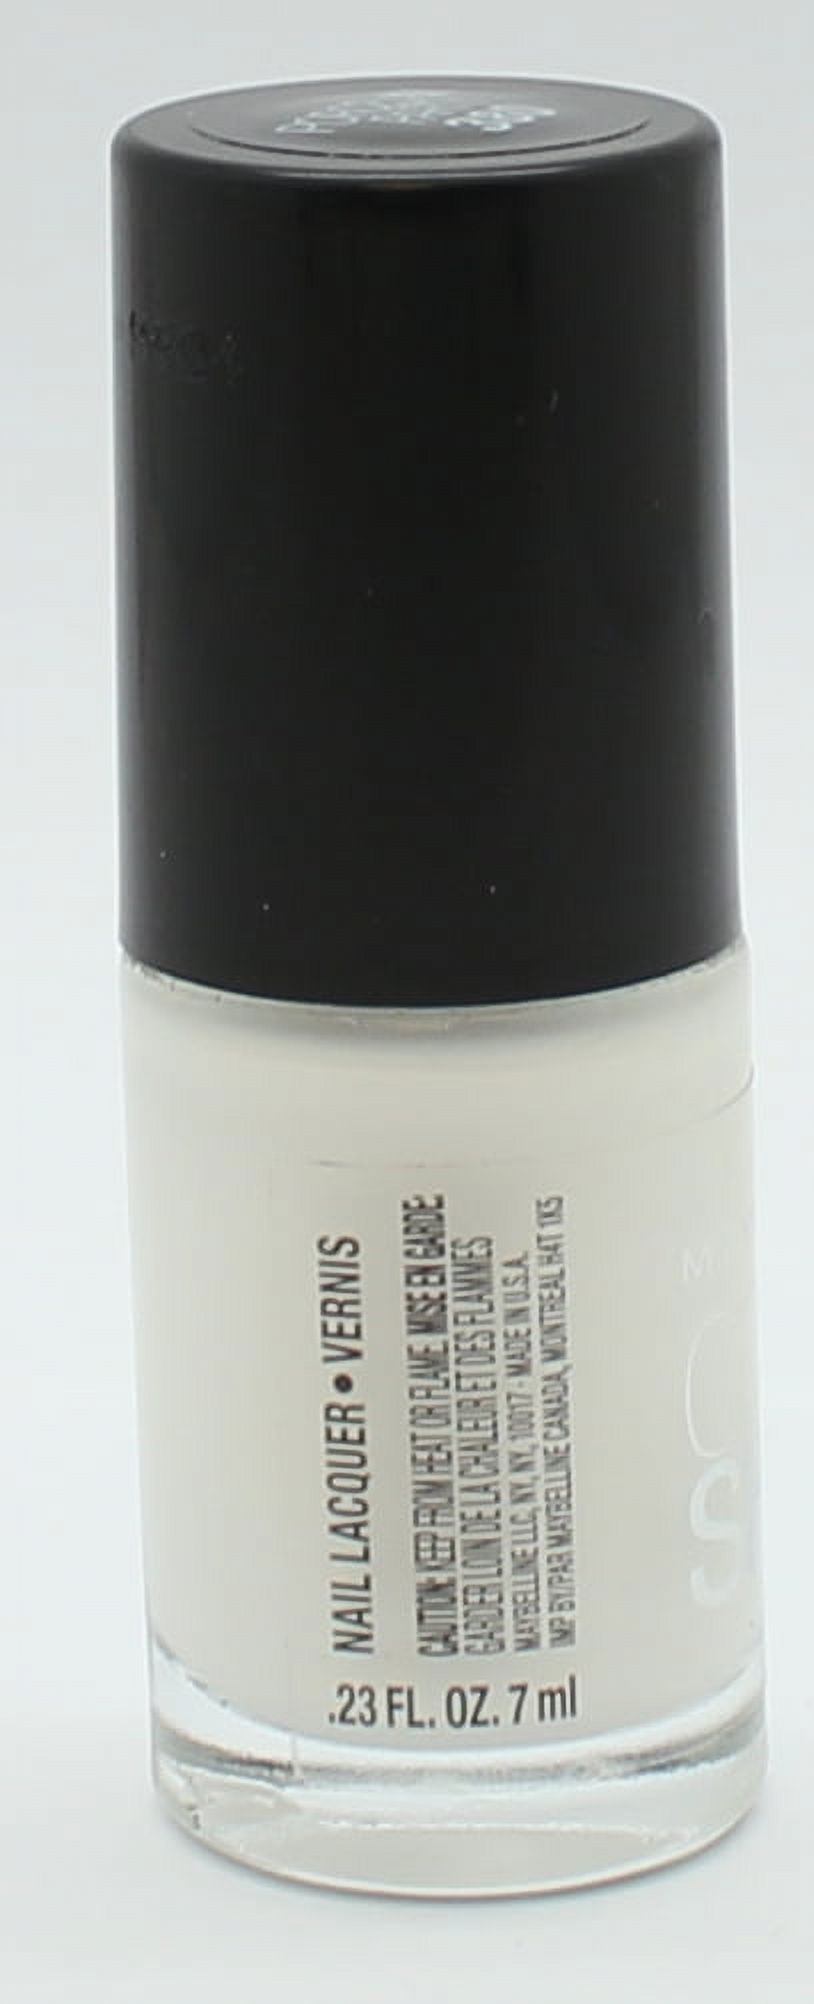 Maybelline Color Show Nail Lacquer - image 2 of 3